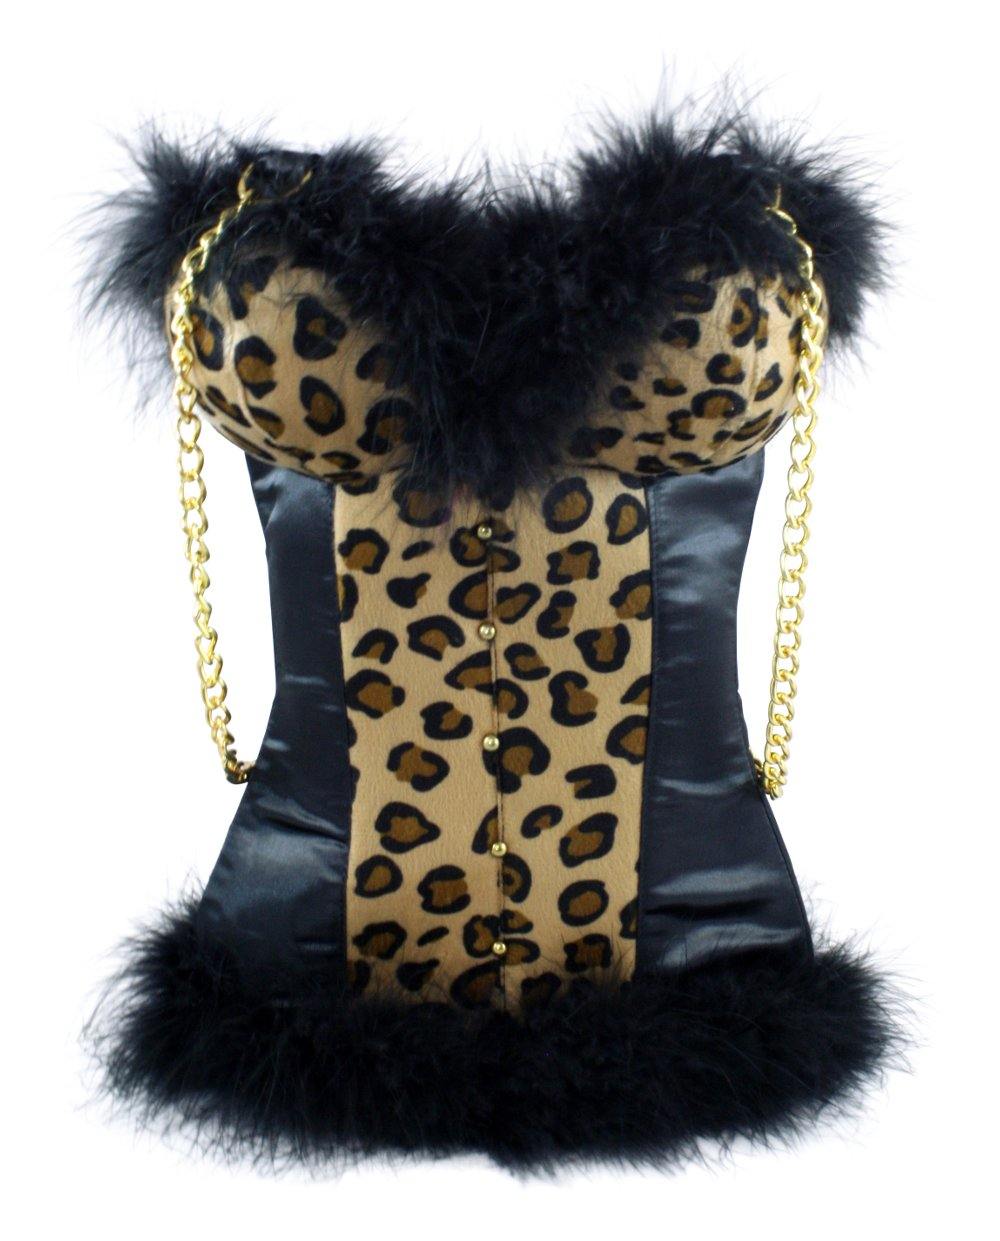 Sexy Cheetah Corset Wine Bag Tote for 2 bottles by Tipsy Totes